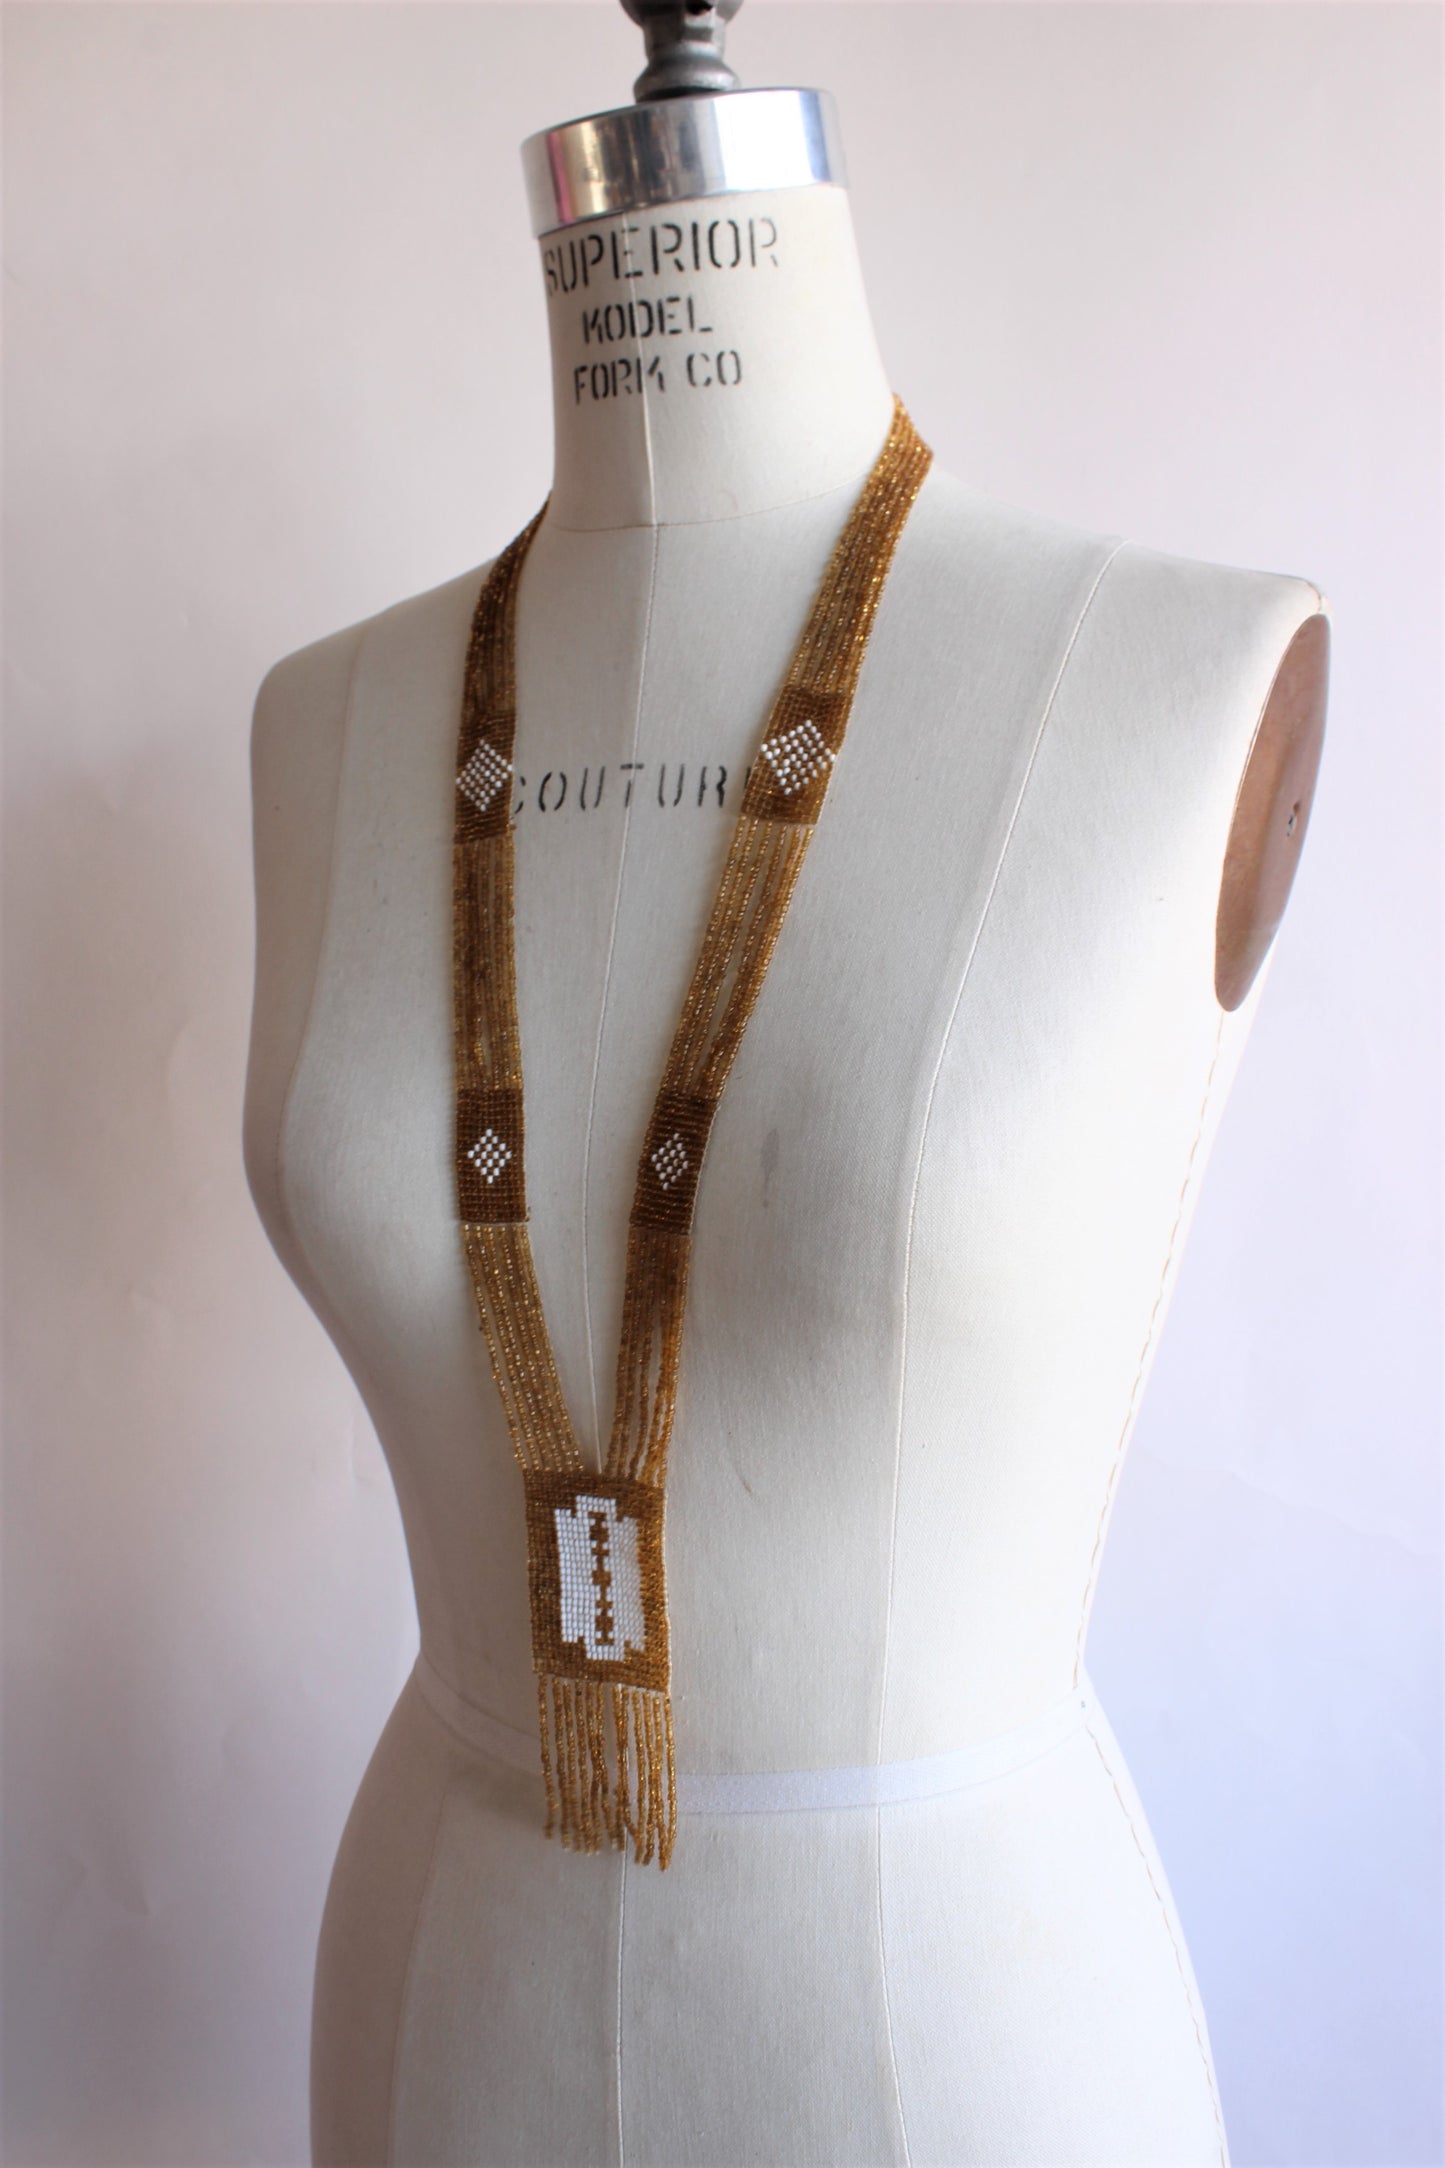 Vintage 1920s Style Gold Seed Bead Necklace